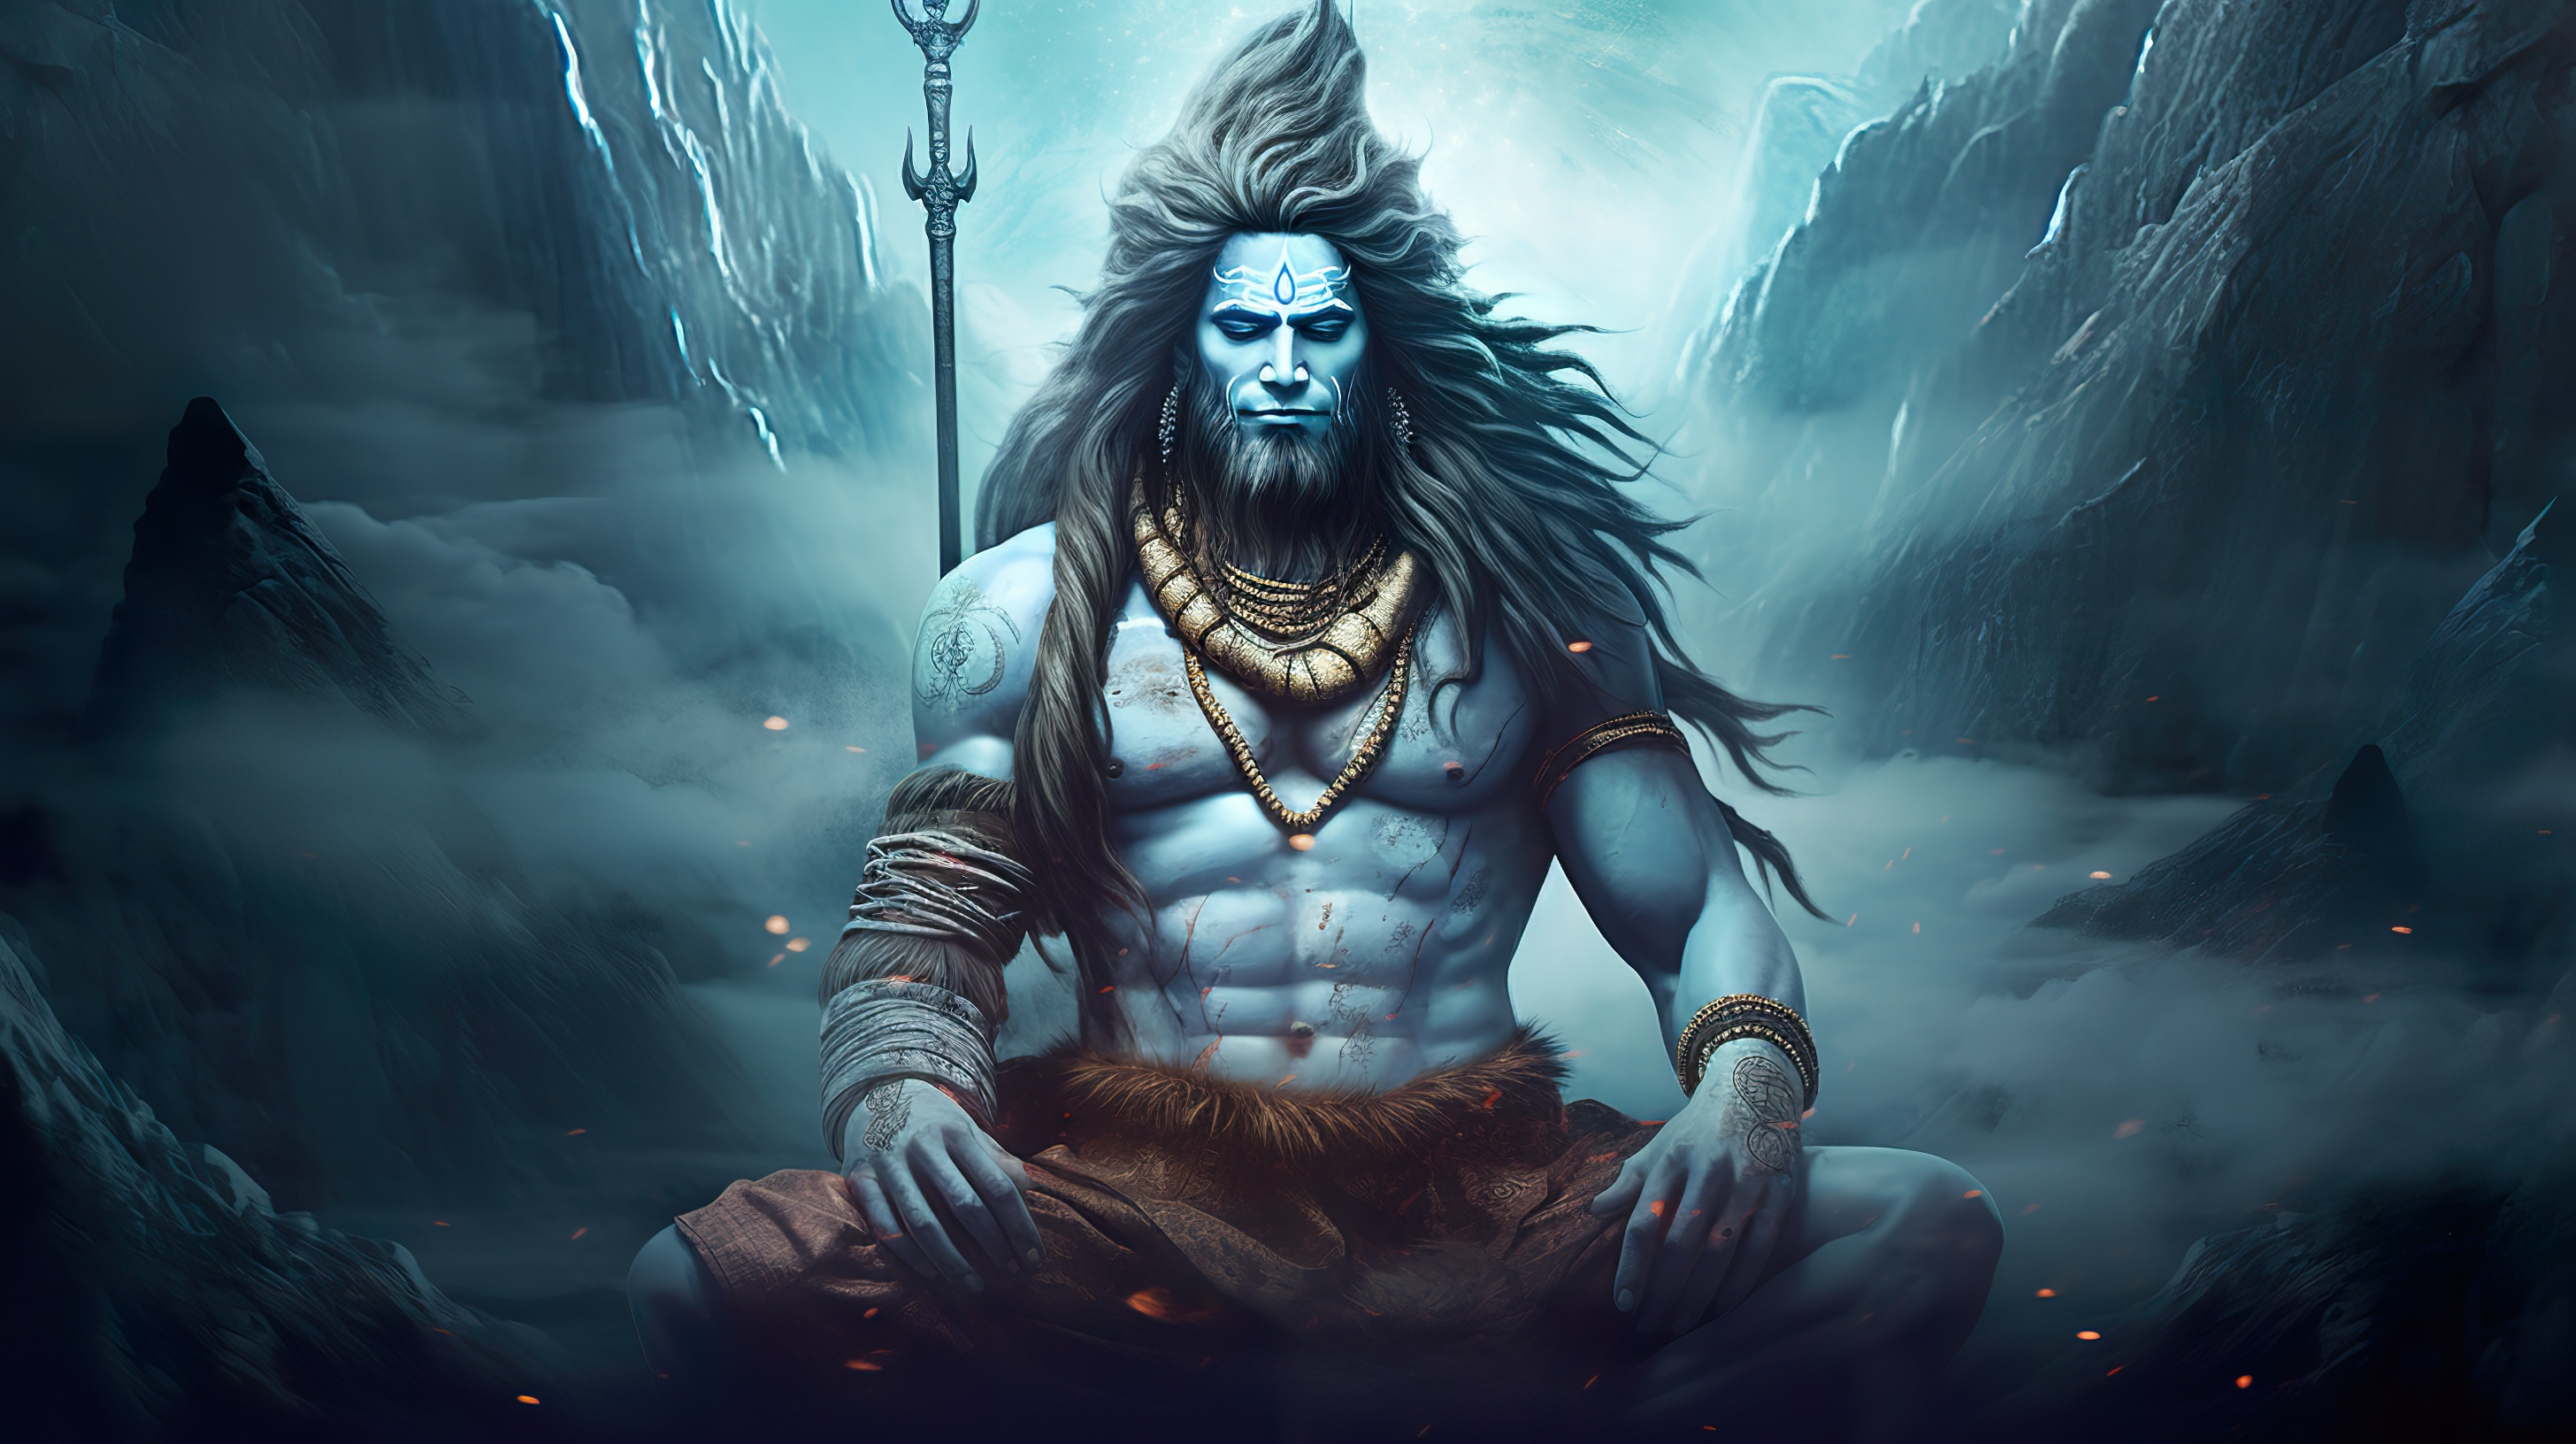 All sizes | Shivji Wallpapers, Different Lord Shiv parvati Wallpaper |  Flickr - Photo Sharing!